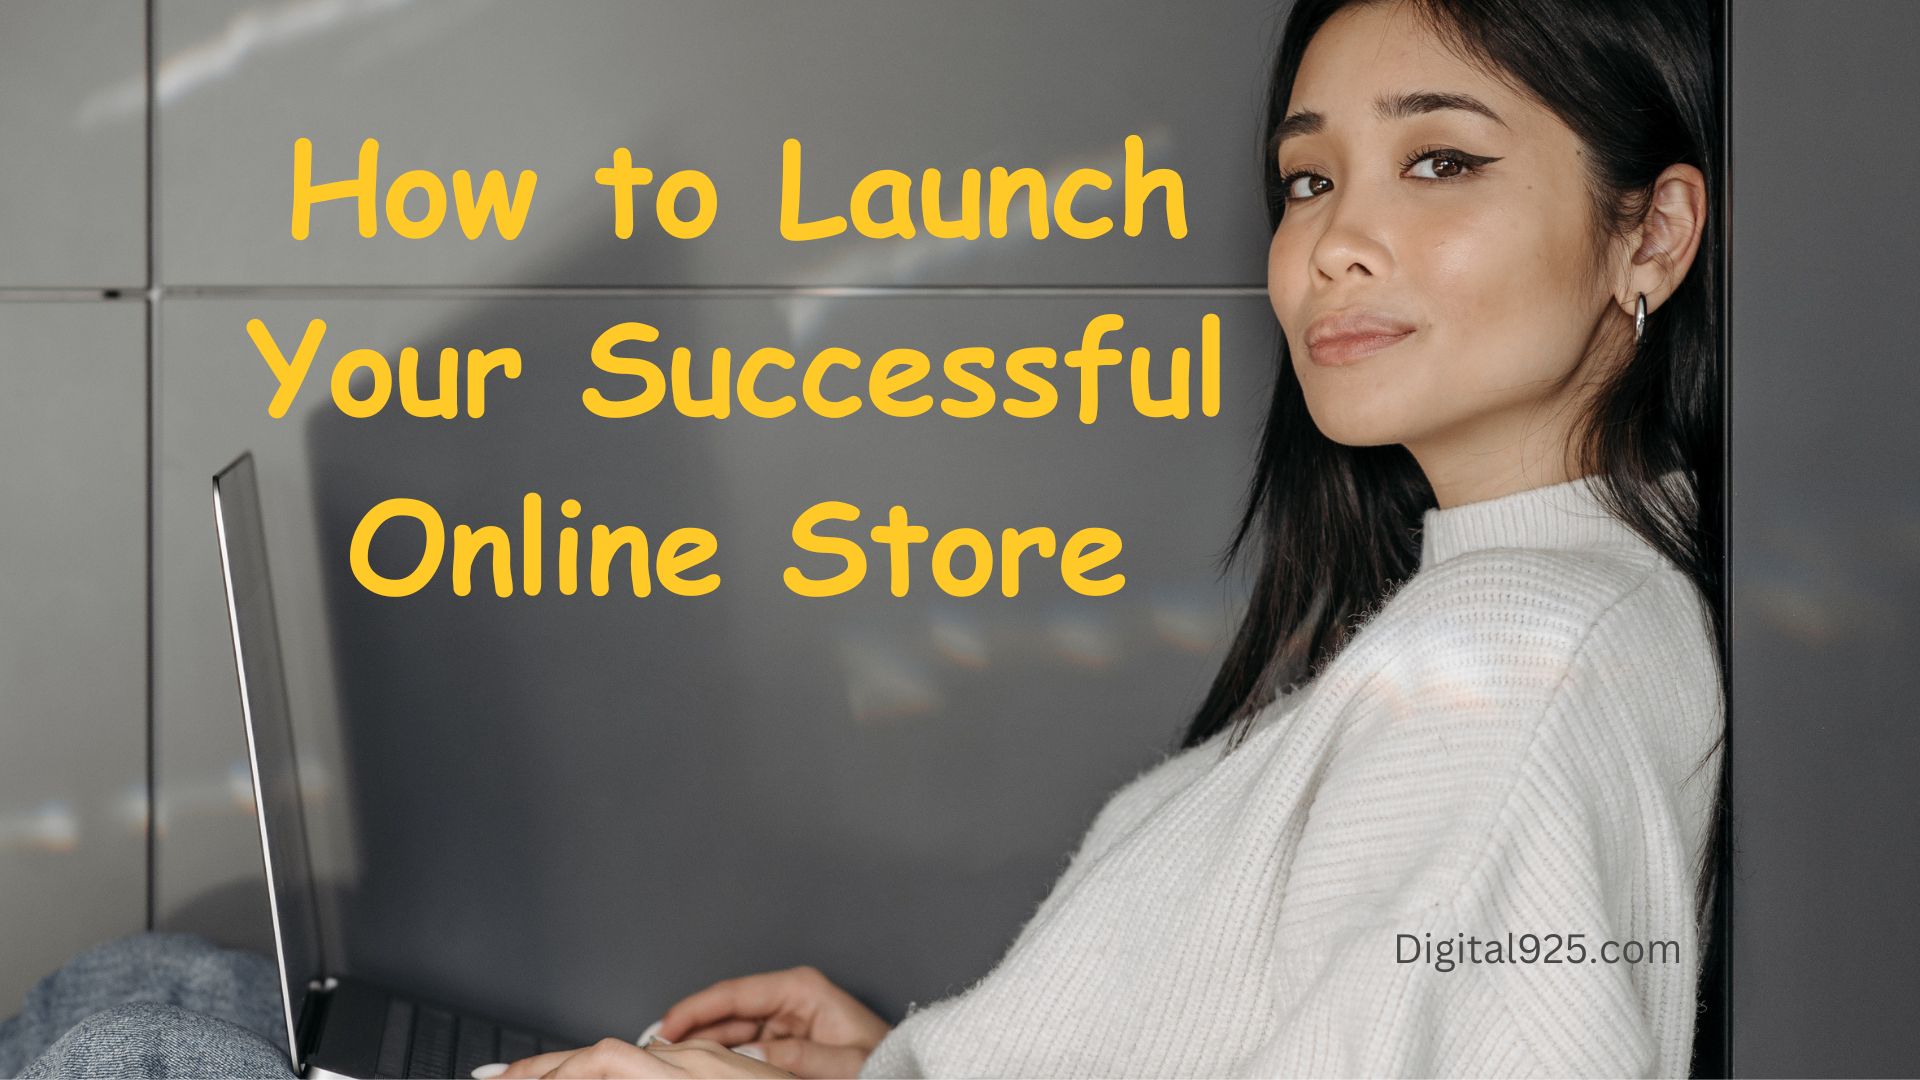 How to Launch Your Successful Online Store